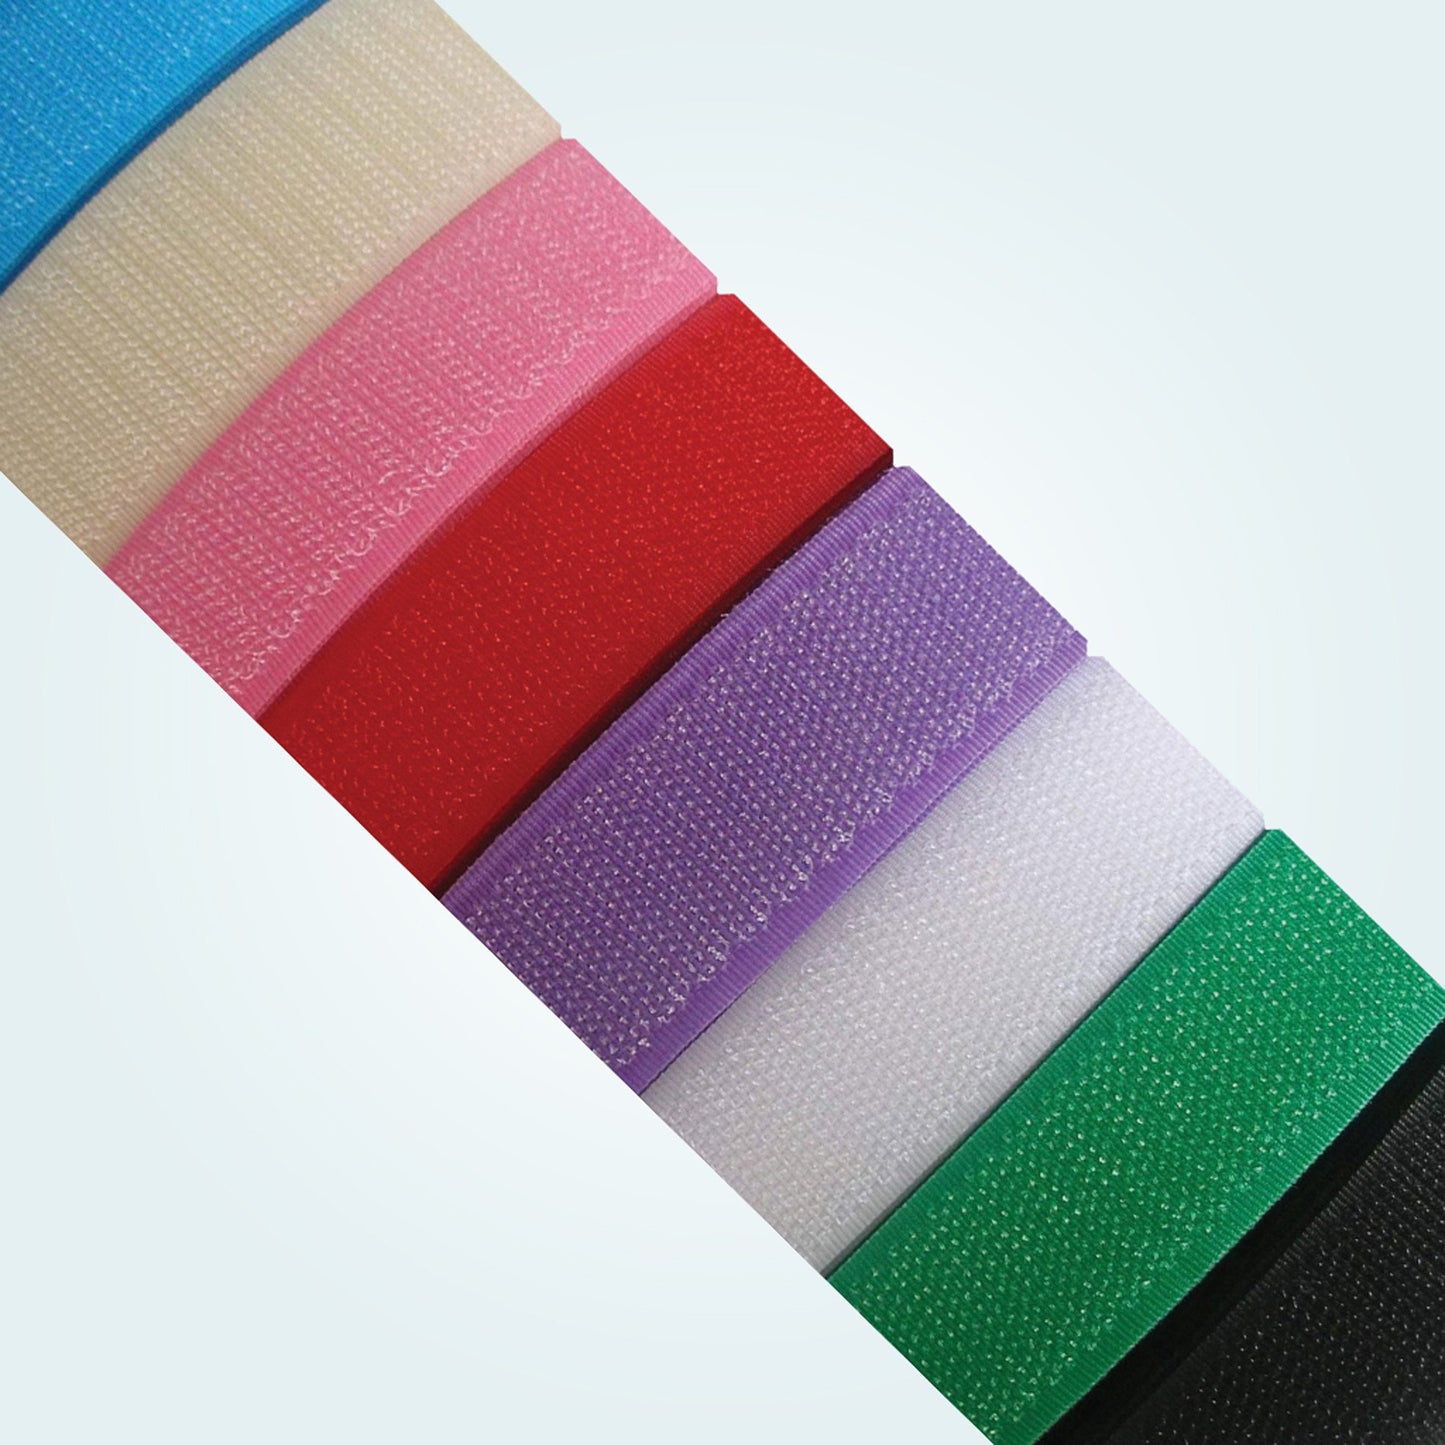 Beneplas Loop is available in a variety of colours.